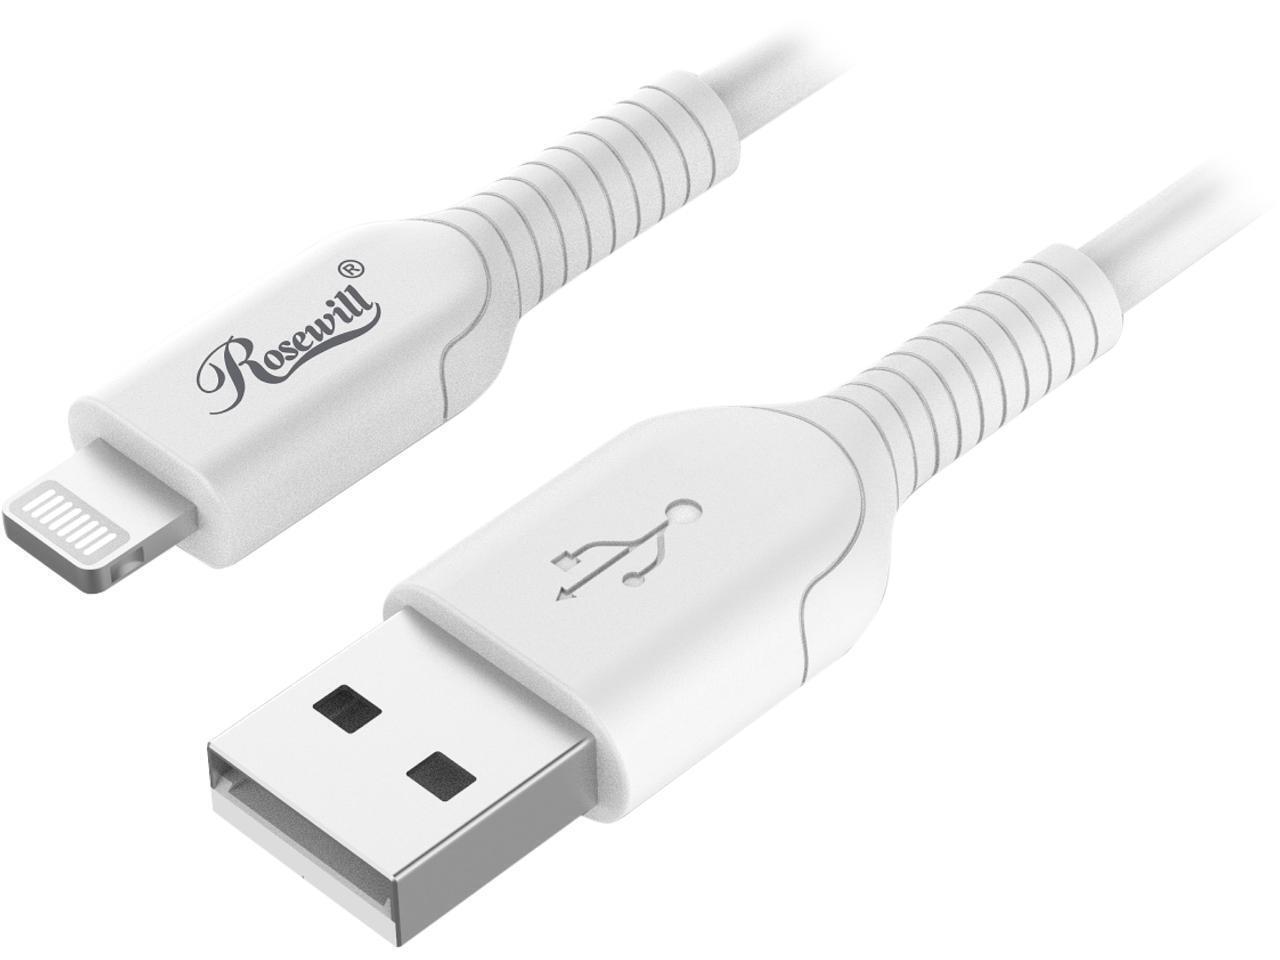 Rosewill iPhone Fast Charger Cable, USB-A to Lightning Cable, MFi Certified, for